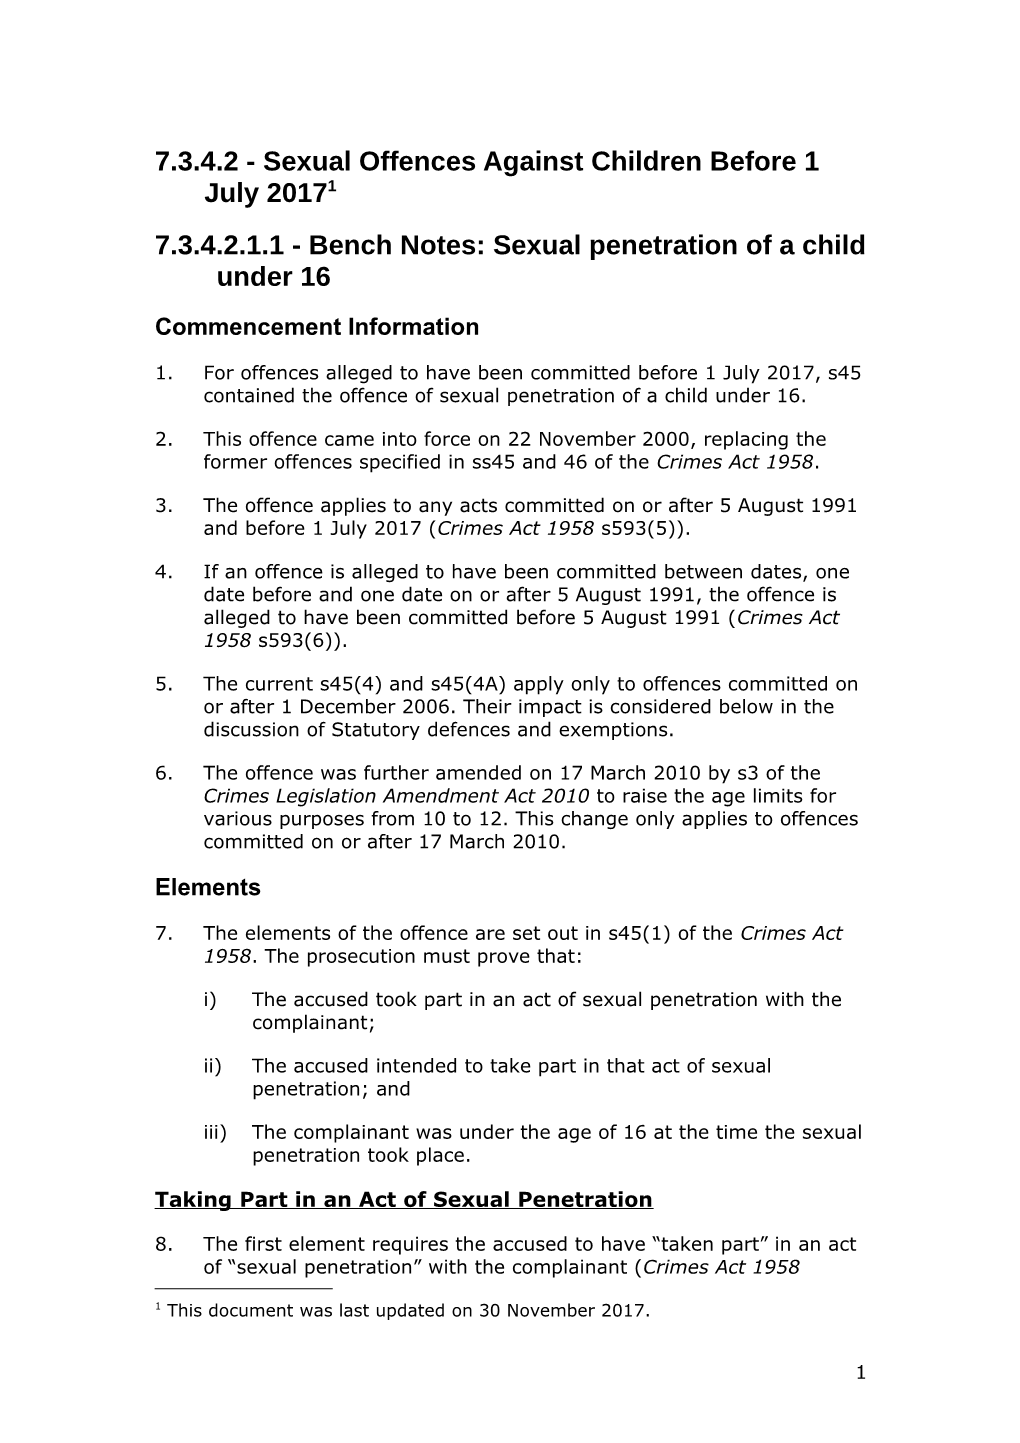 7.3.4.2.1.1 - Bench Notes: Sexual Penetration of a Child Under 16